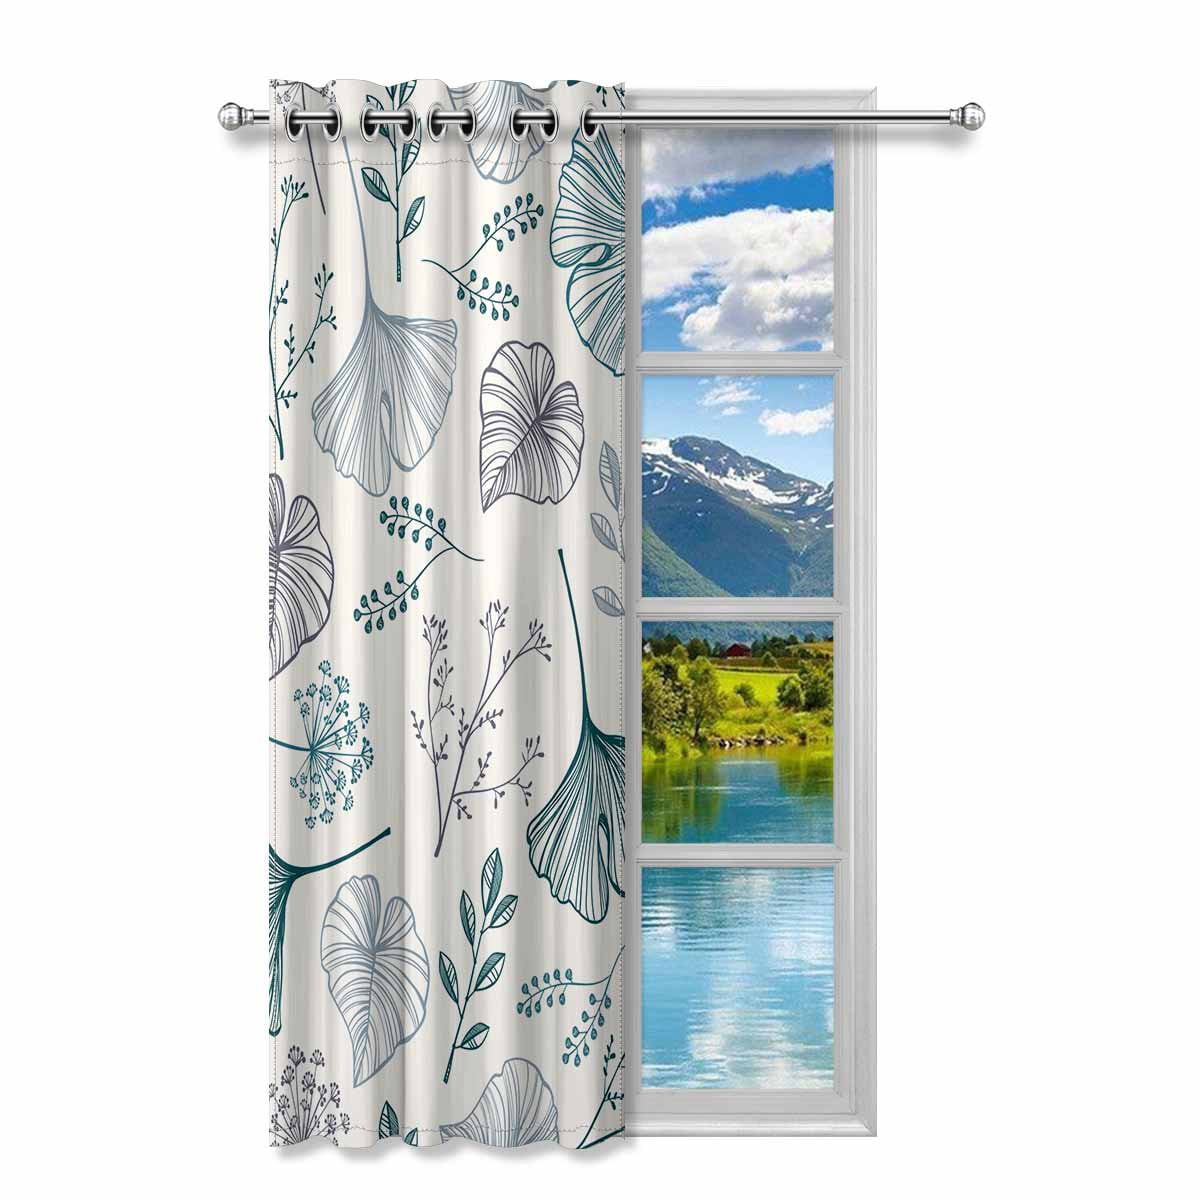 YUSDECOR Leaf, Flowers and Herbs Blackout Window Curtain Drapes Bedroom